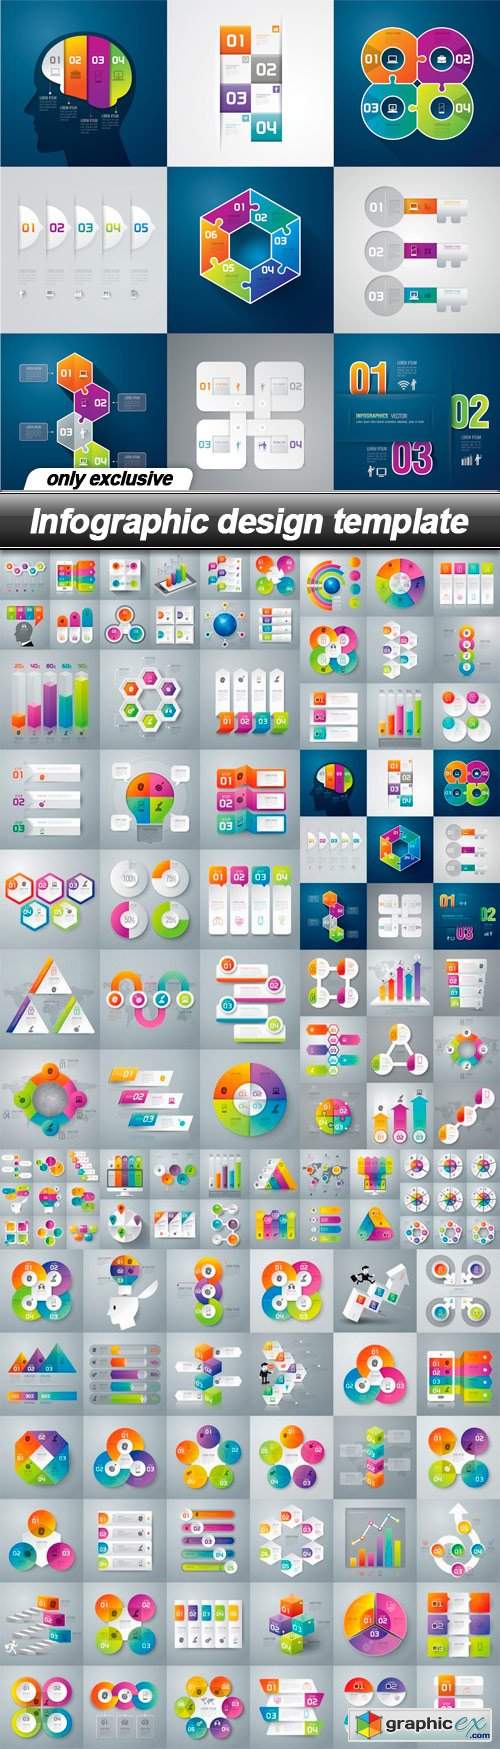  Infographic design template - 15 EPS 